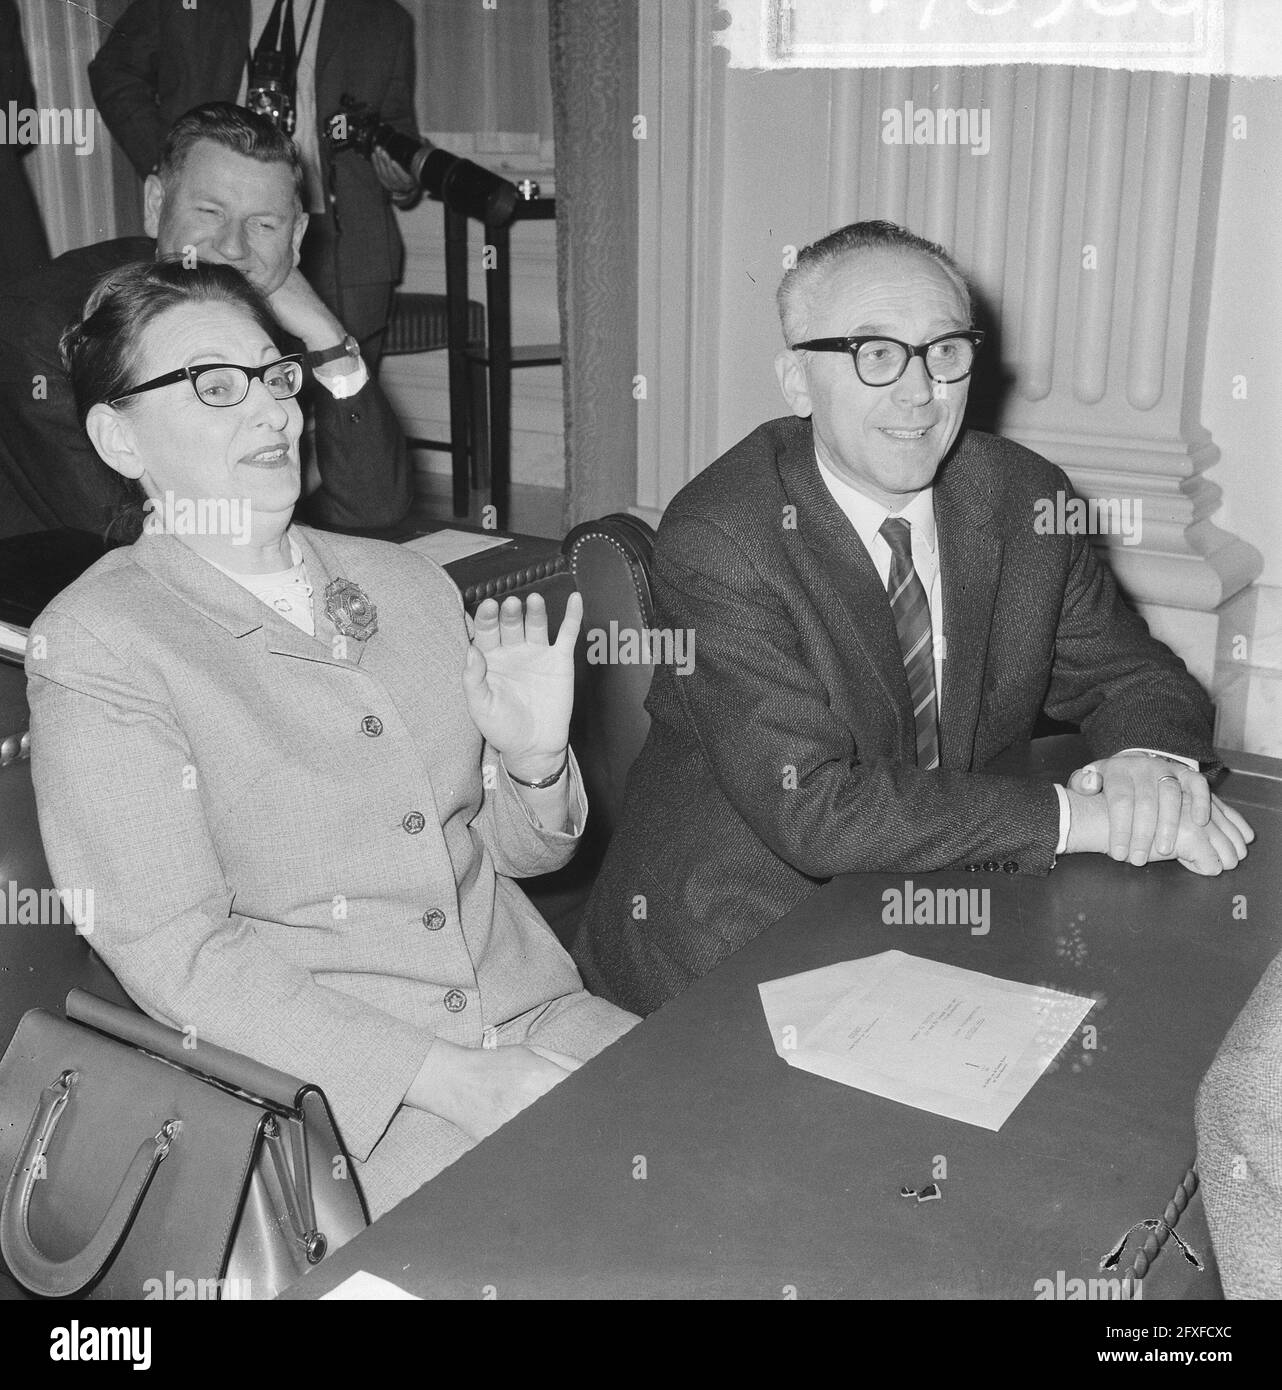 Lower House, Dr. J. G. H. Tans in the bench next to Mrs. G. Brautigam, April 27, 1965, benches, cabinets, The Netherlands, 20th century press agency photo, news to remember, documentary, historic photography 1945-1990, visual stories, human history of the Twentieth Century, capturing moments in time Stock Photo